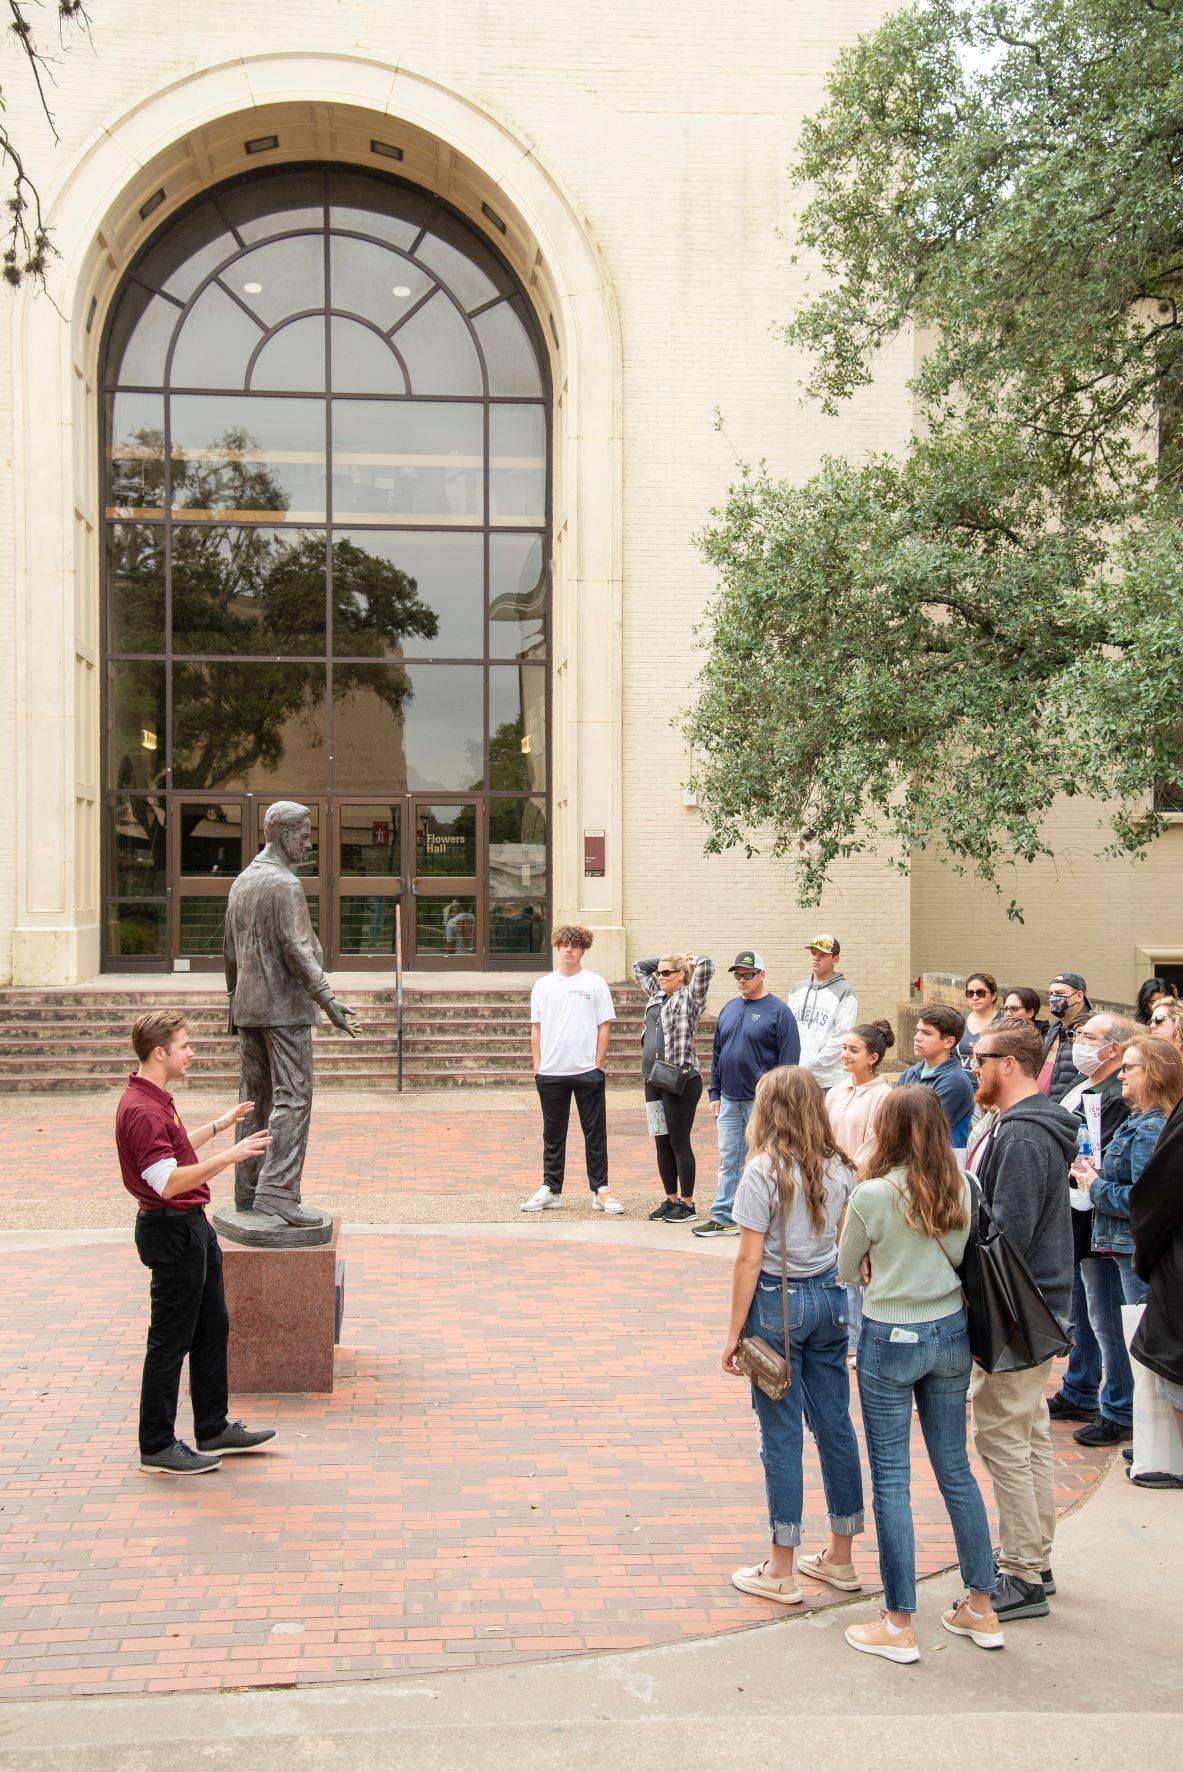 A tour guide talking to a group of visitors near the LBJ statue on campus.